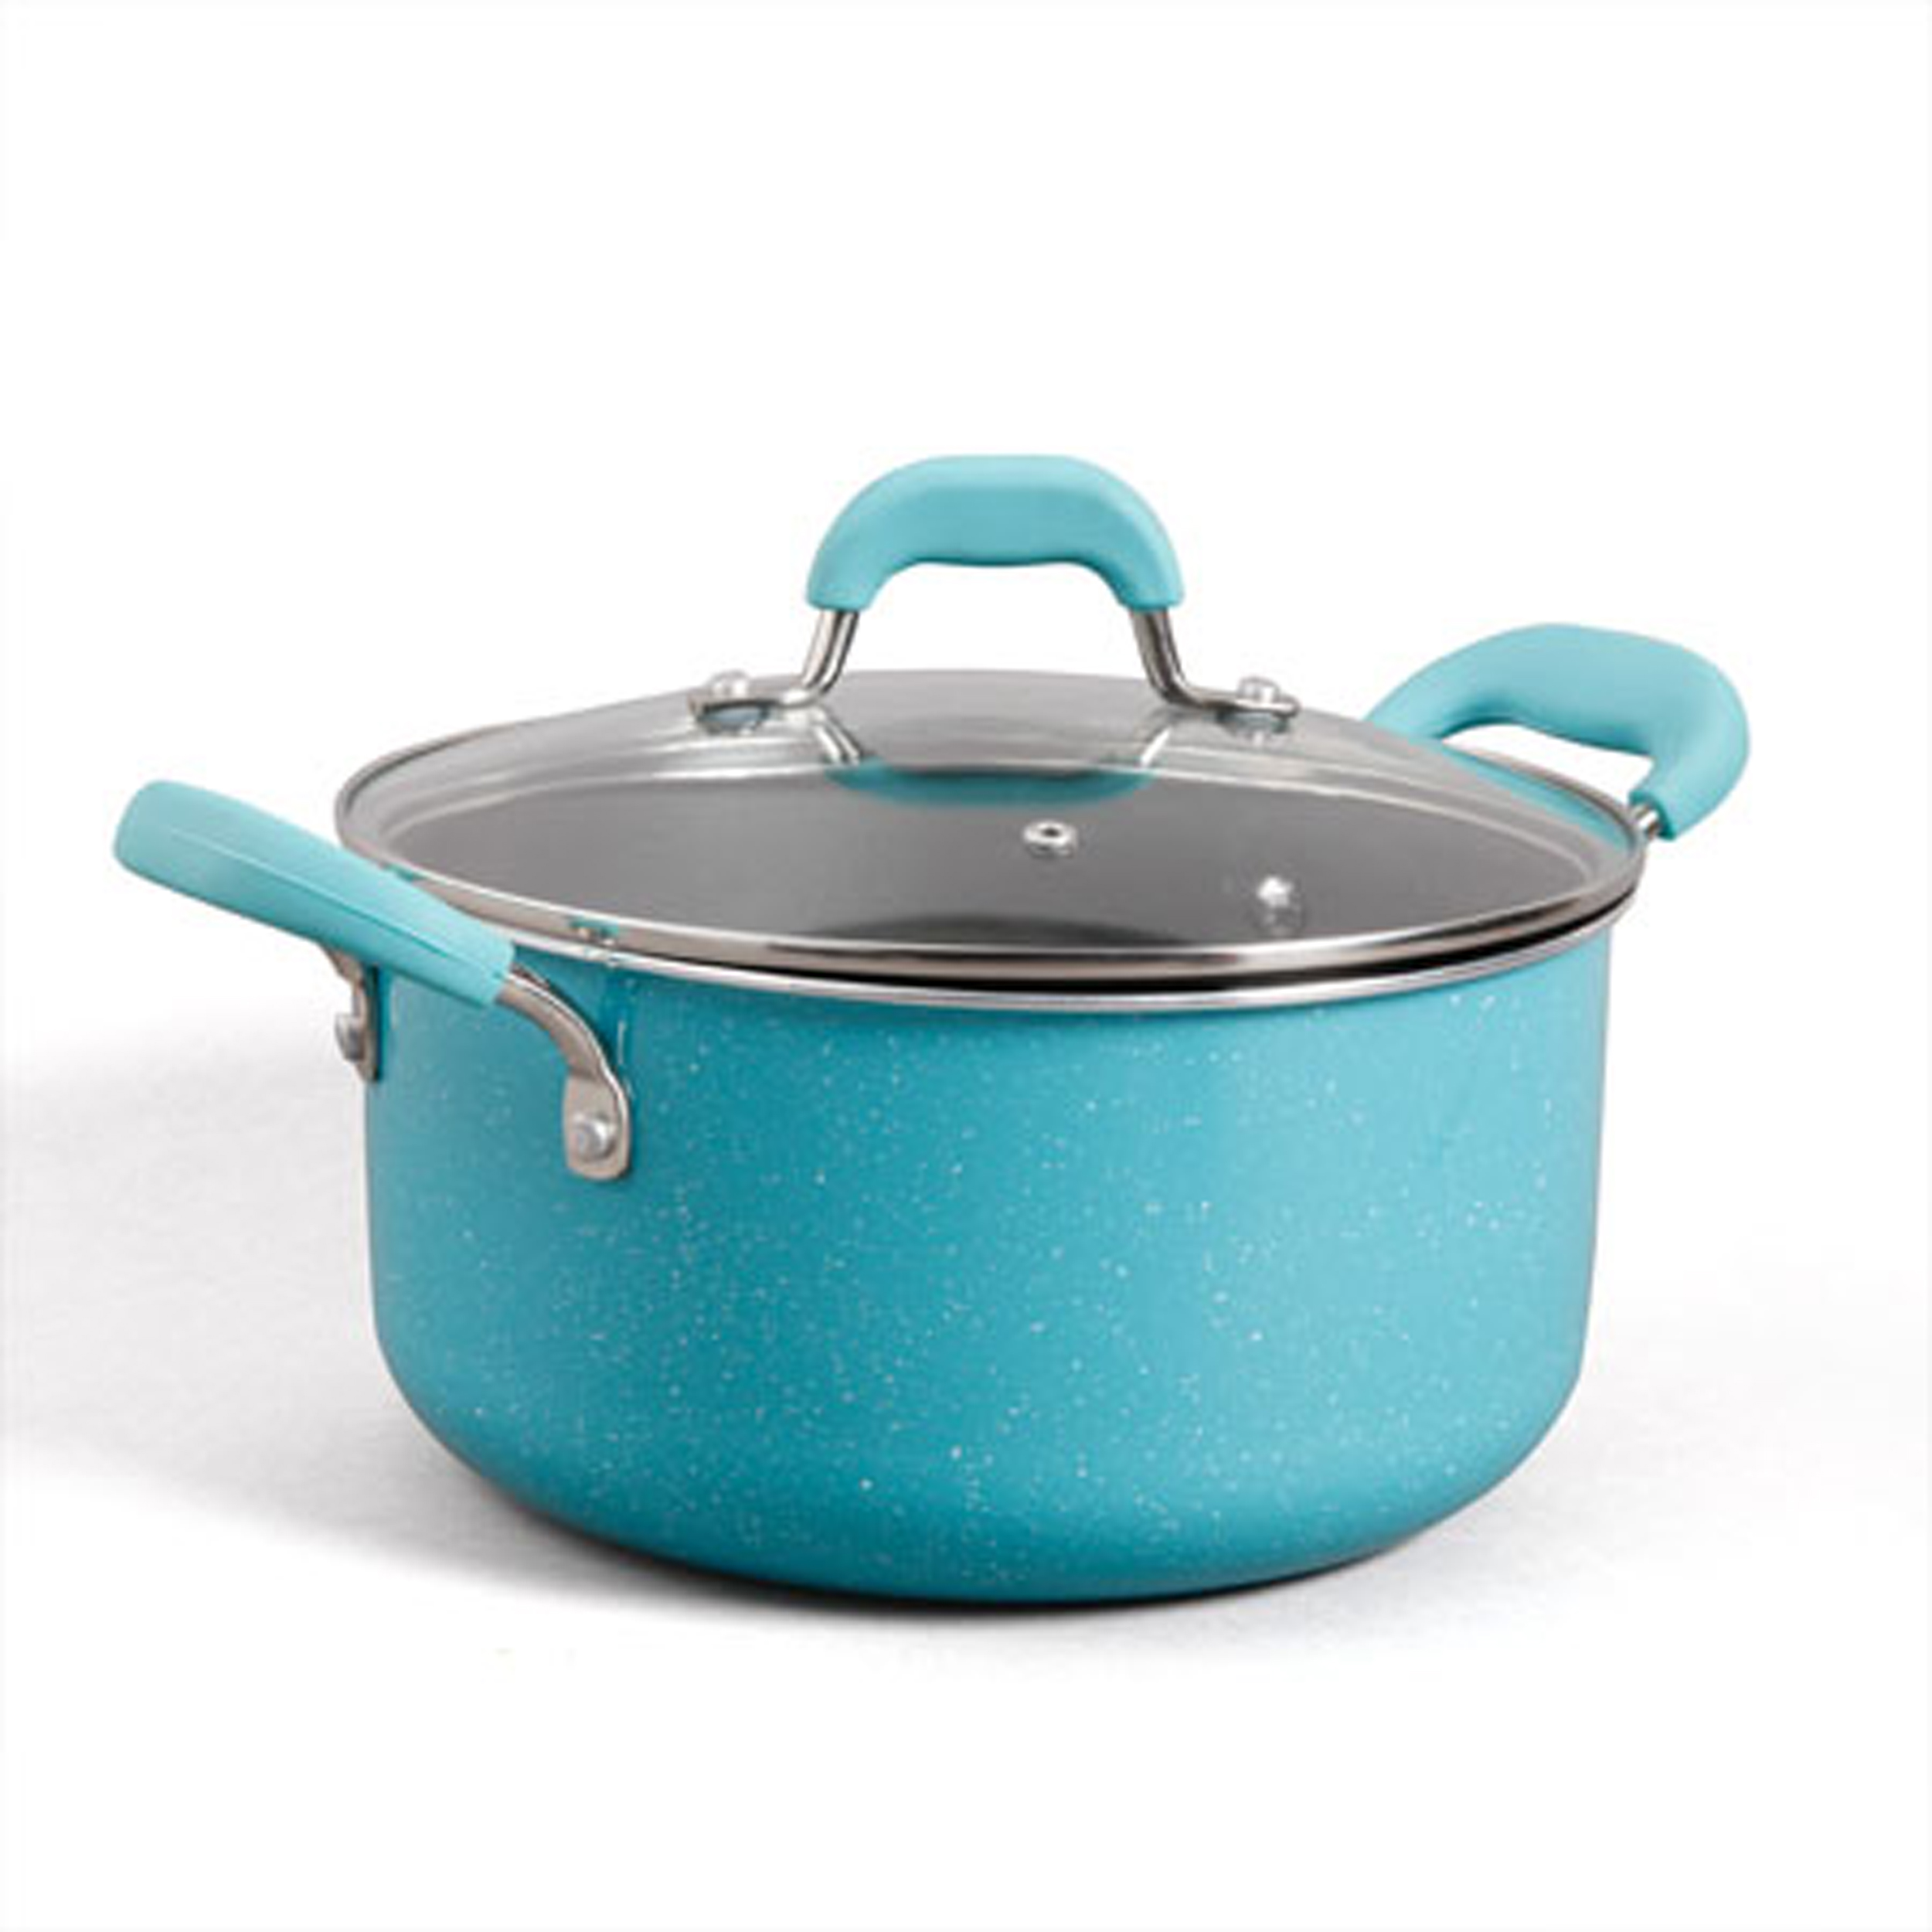 The Pioneer Woman Vintage Speckle & Cast Iron 10-Piece Non-Stick Cookware Set, Turquoise - image 5 of 10